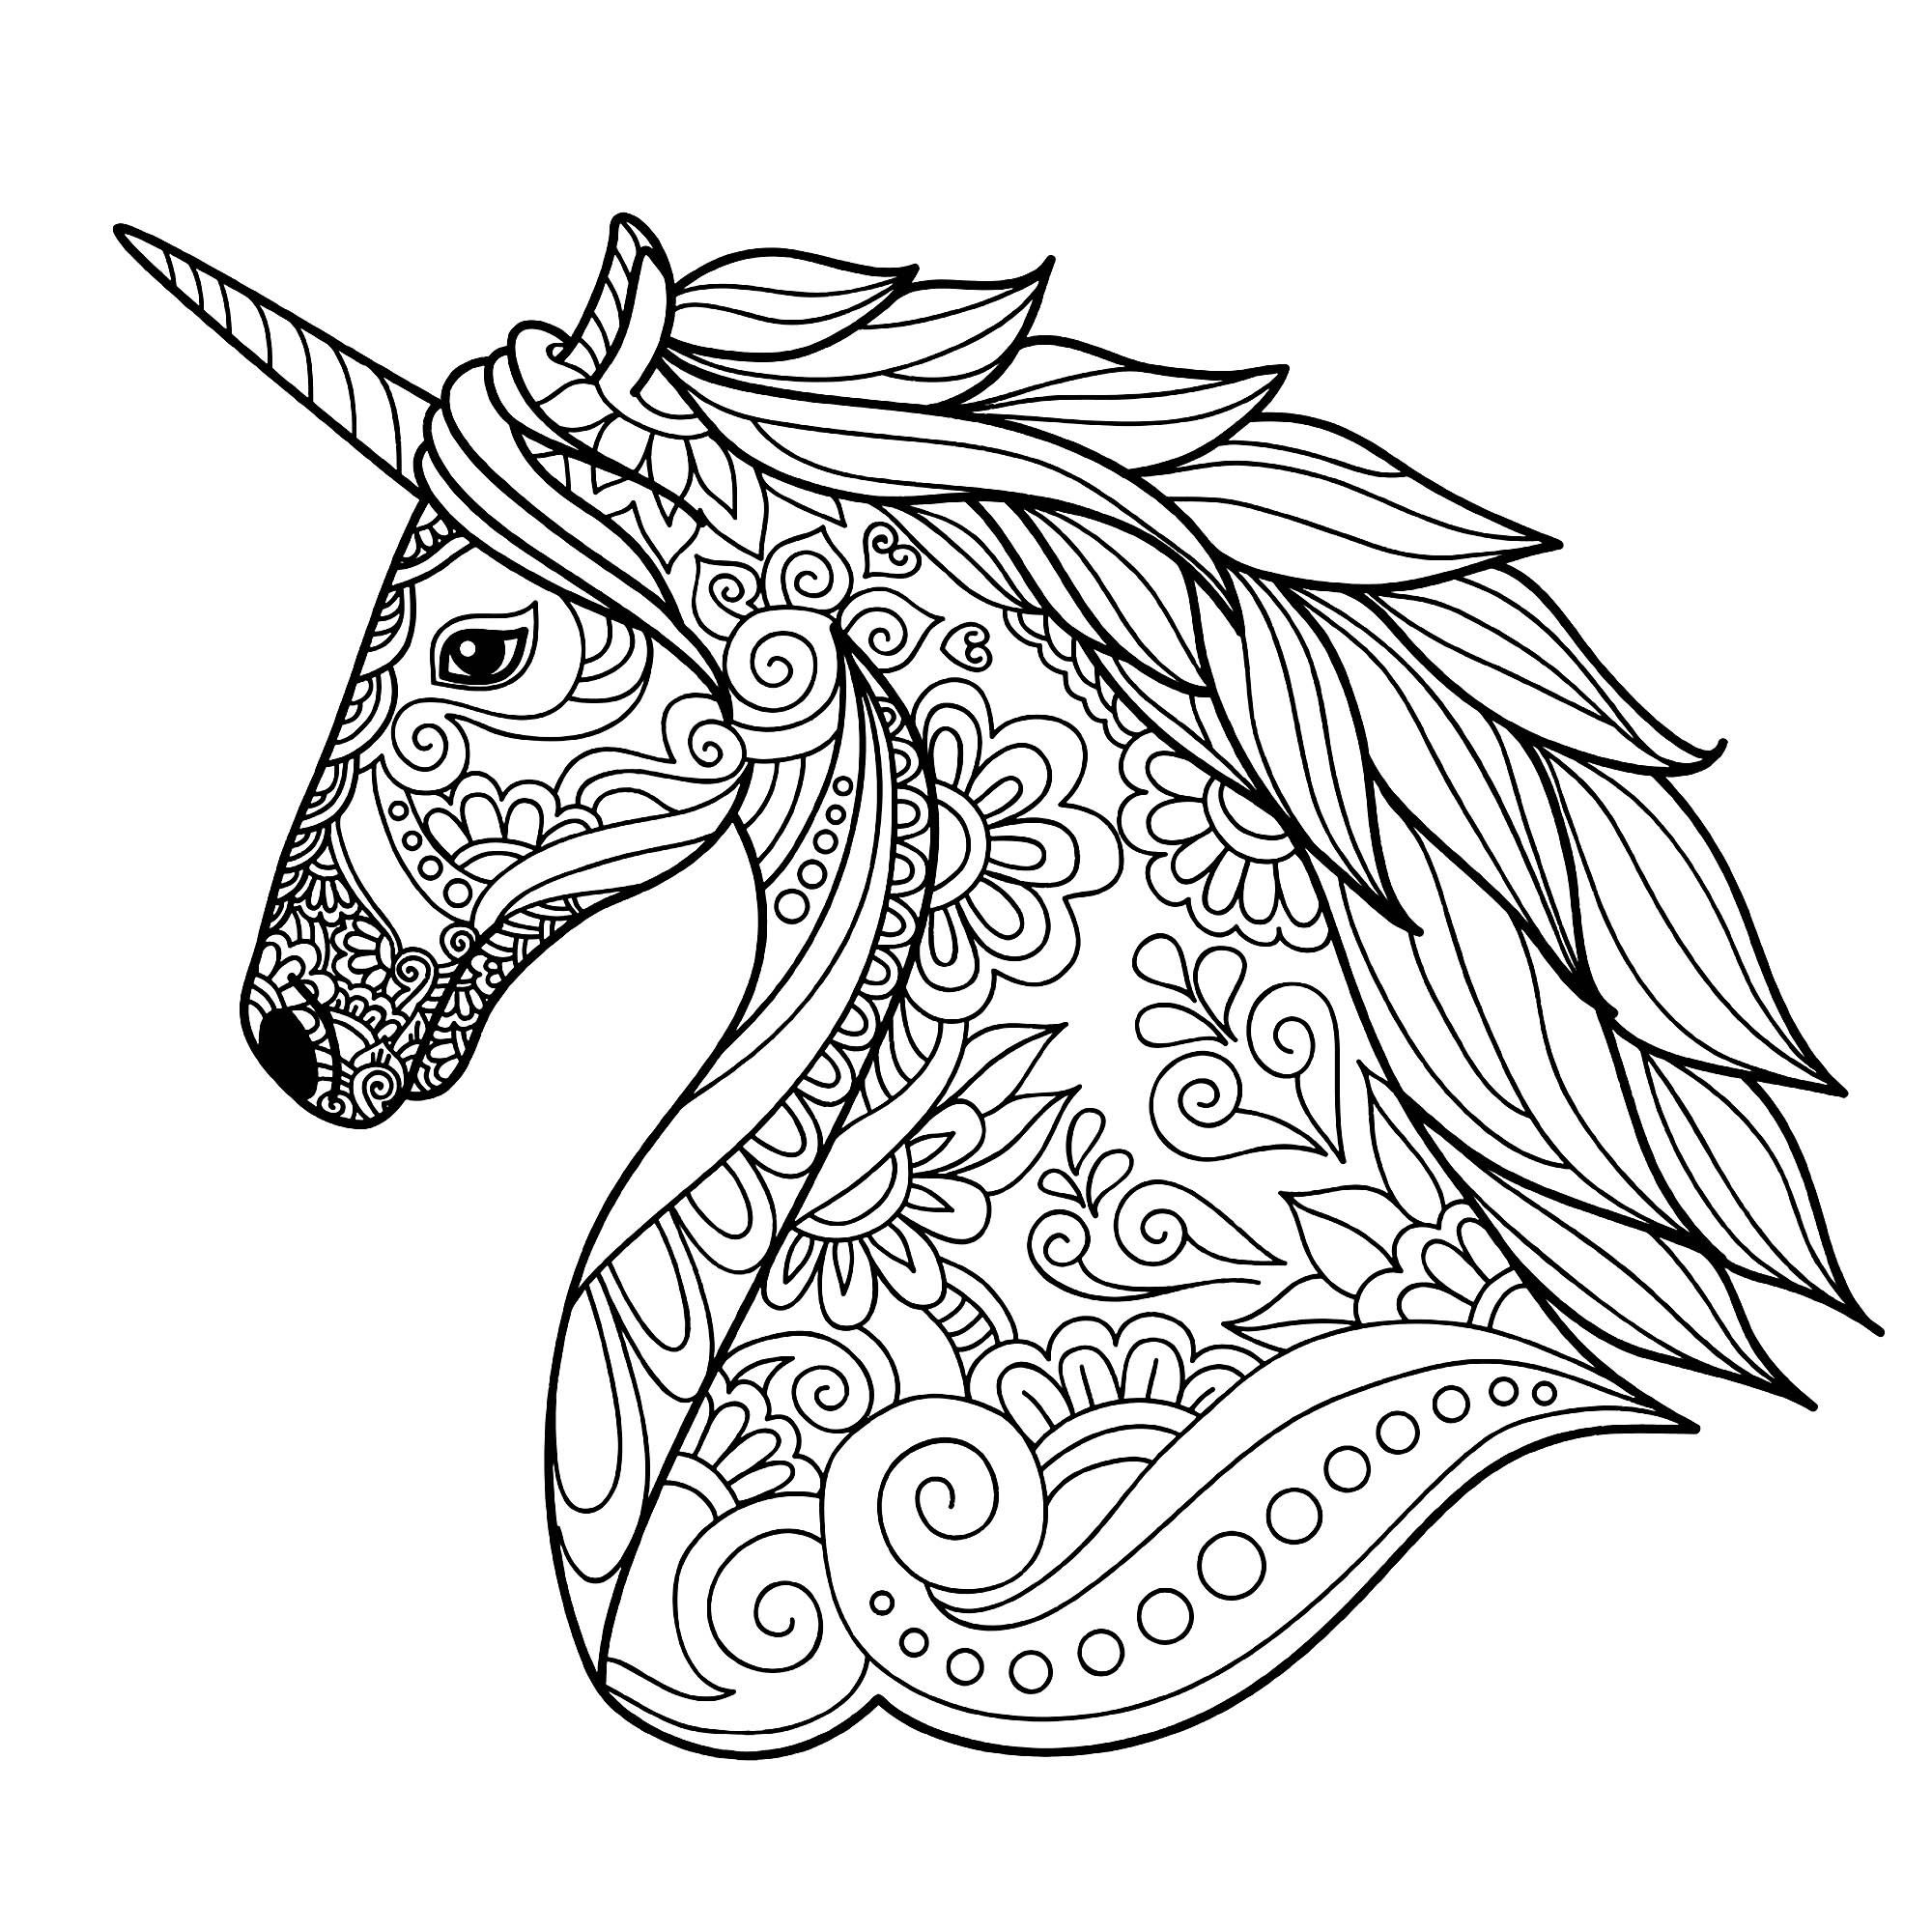 Unicorn Adult Coloring Book
 Unicorn head simple Unicorns Adult Coloring Pages